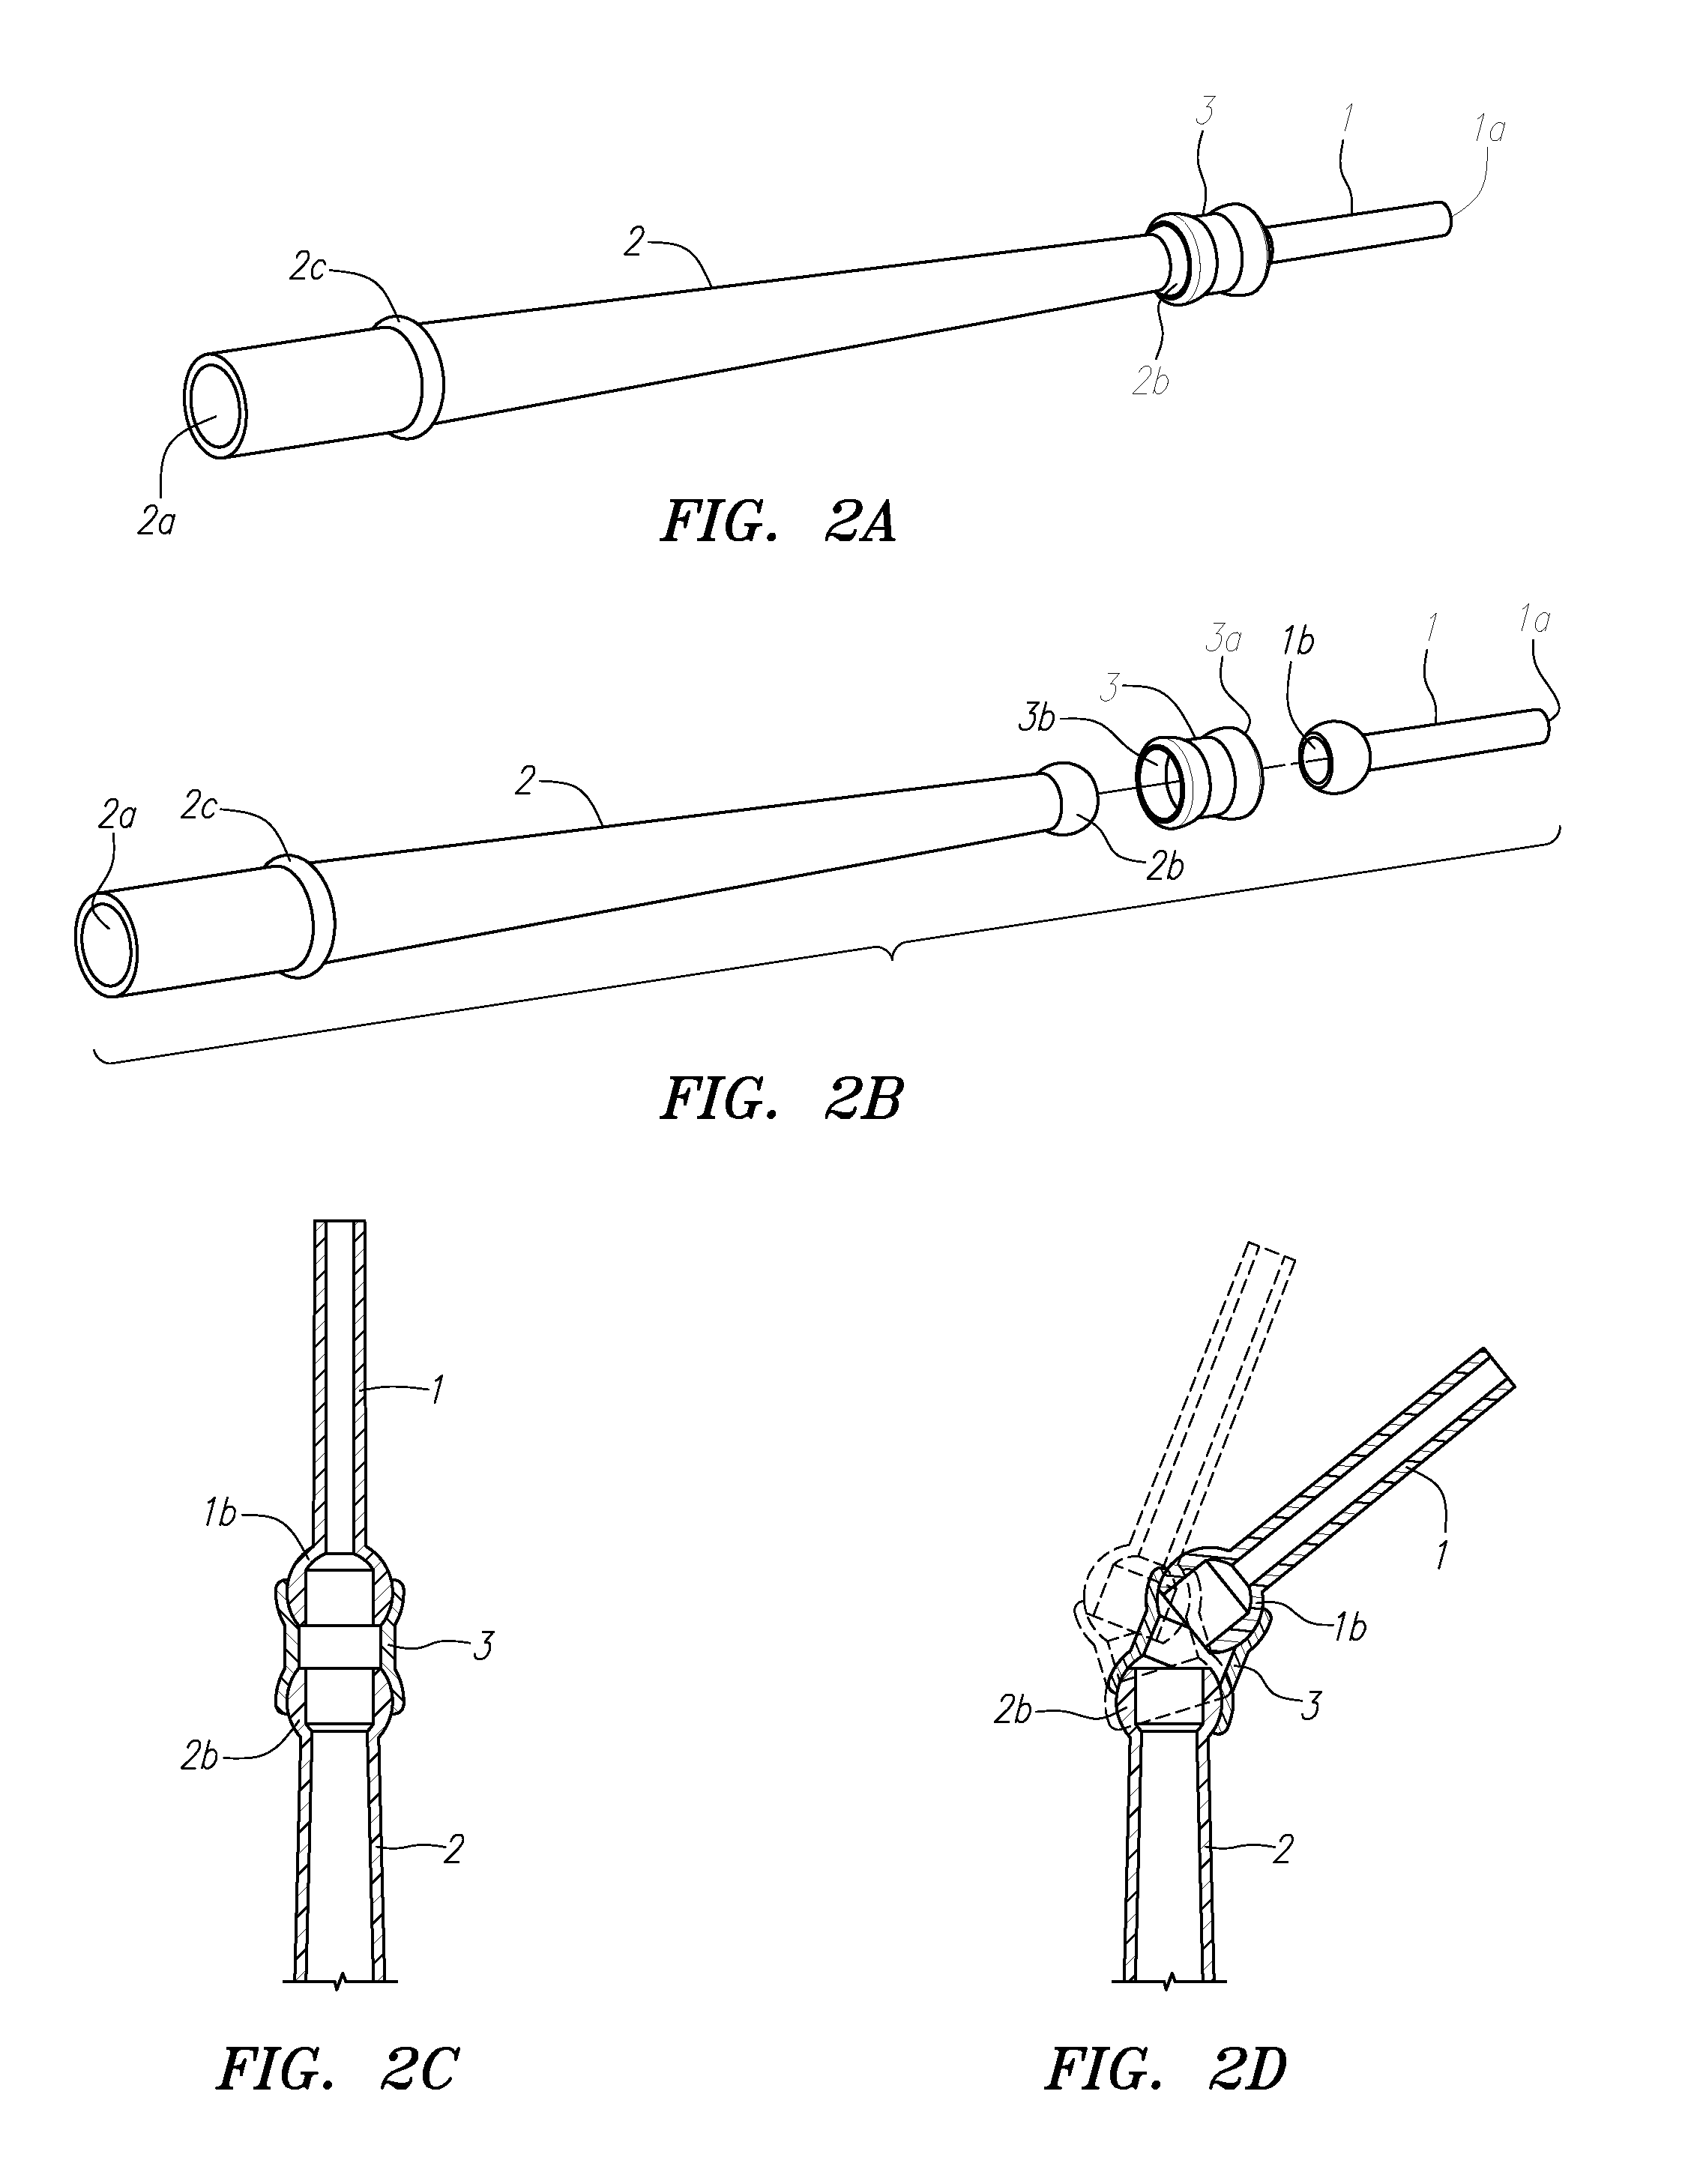 Adjustable suction tips for dental and medical uses